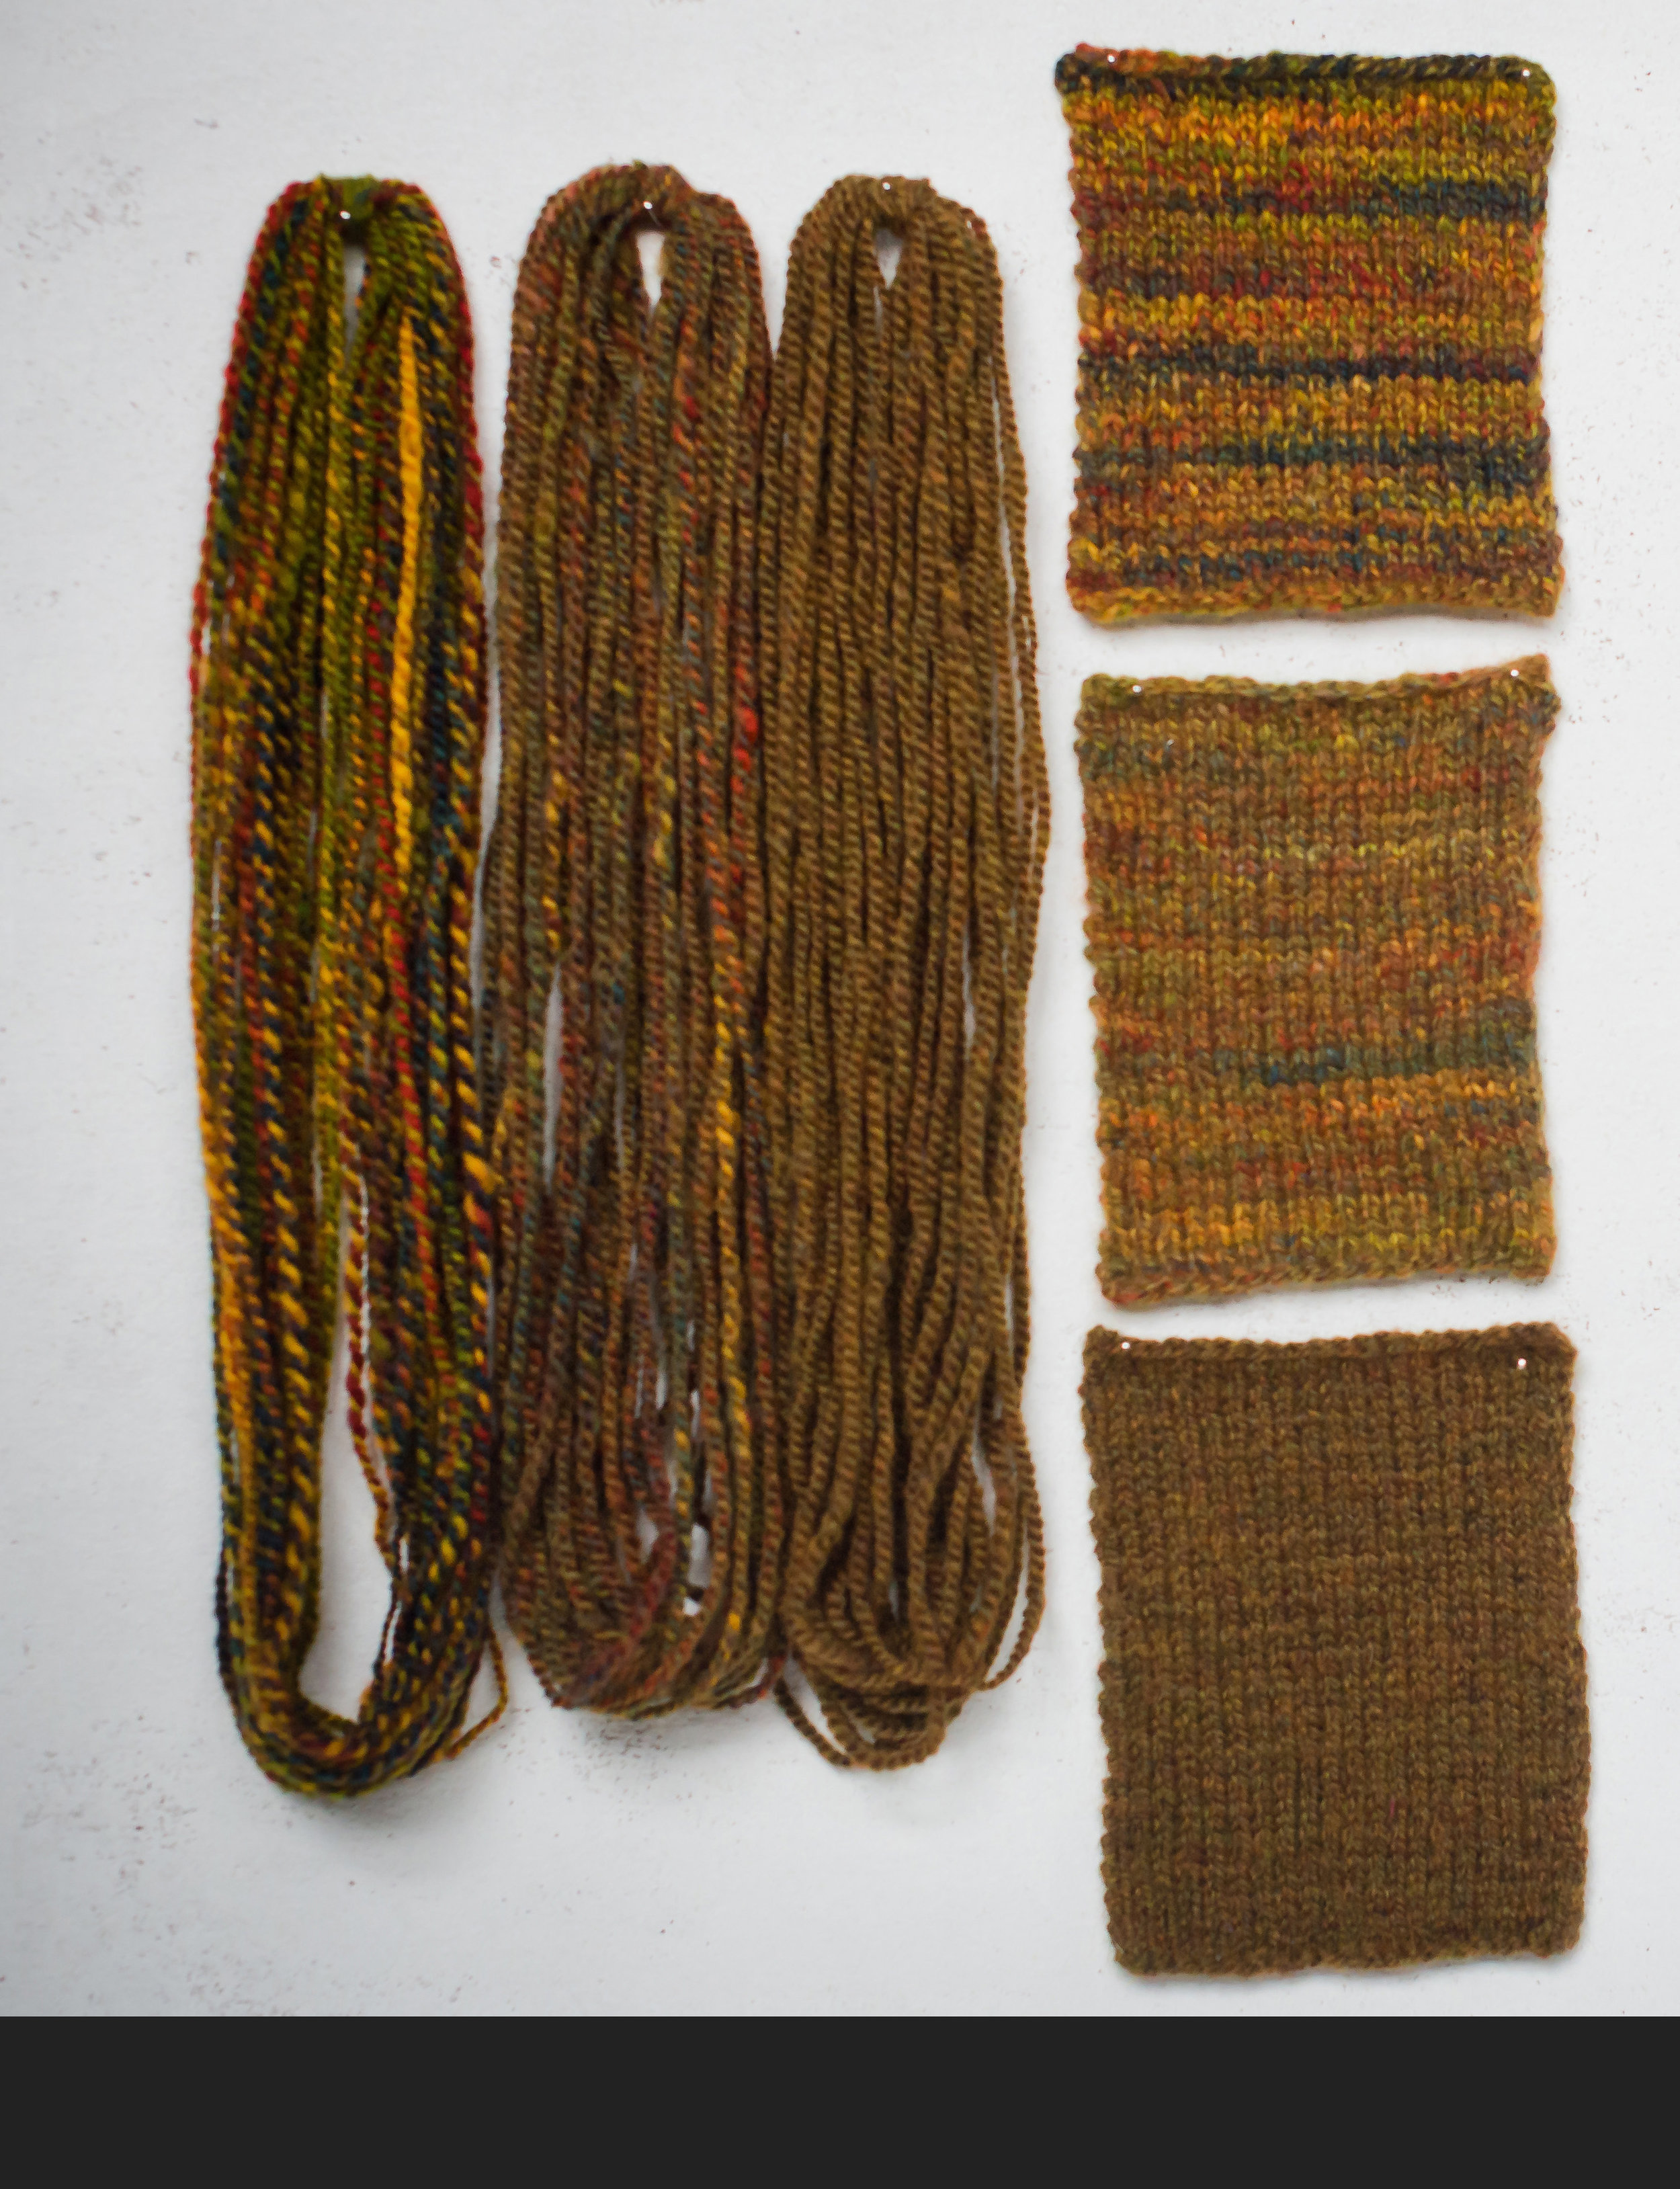 See how each technique looks when applied to a single top in both a skein of handspun and a knitted swatch.